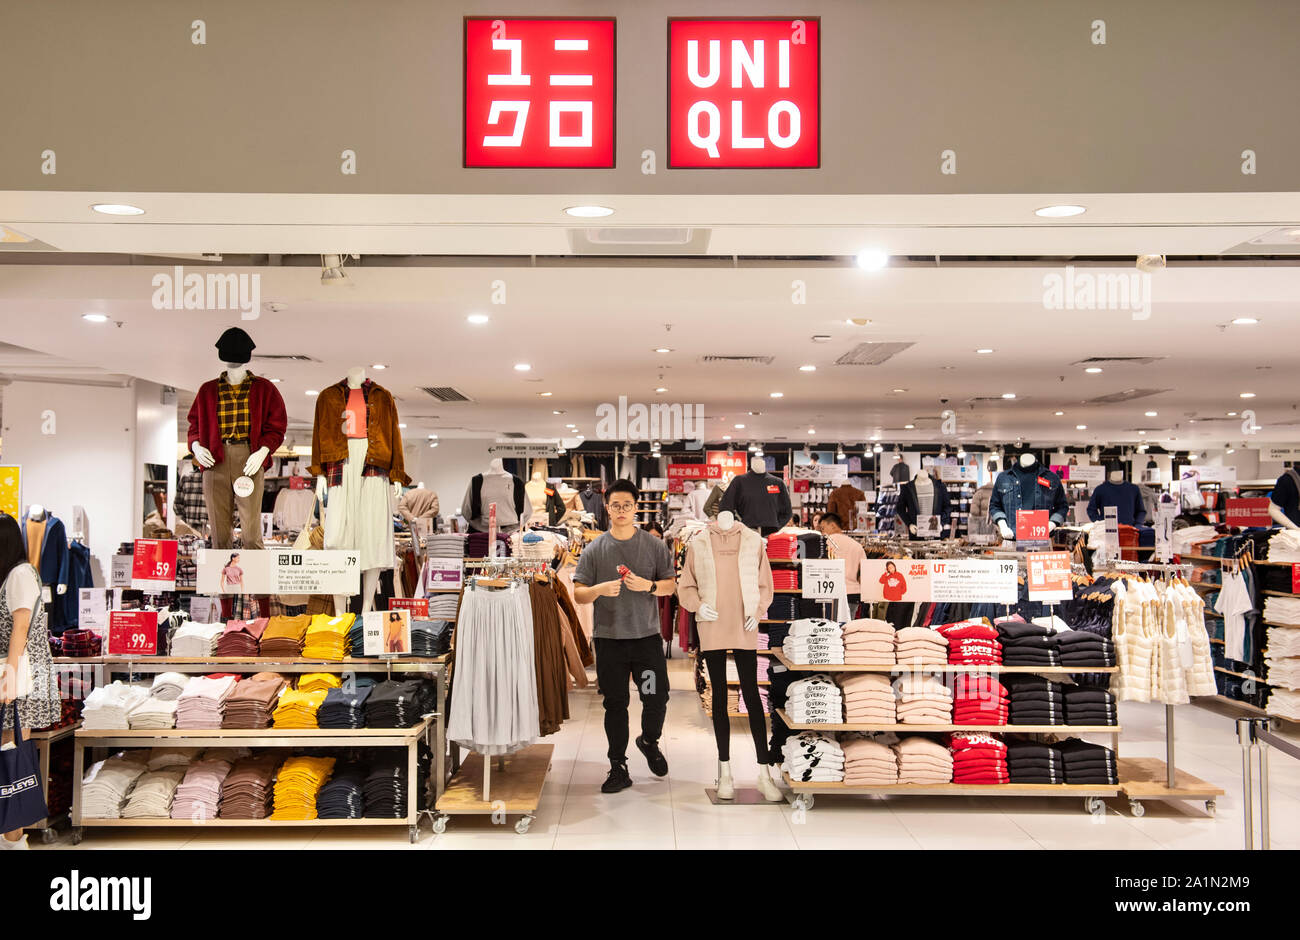 Japanese clothing brand store Uniqlo seen in Hong Kong Stock Photo - Alamy